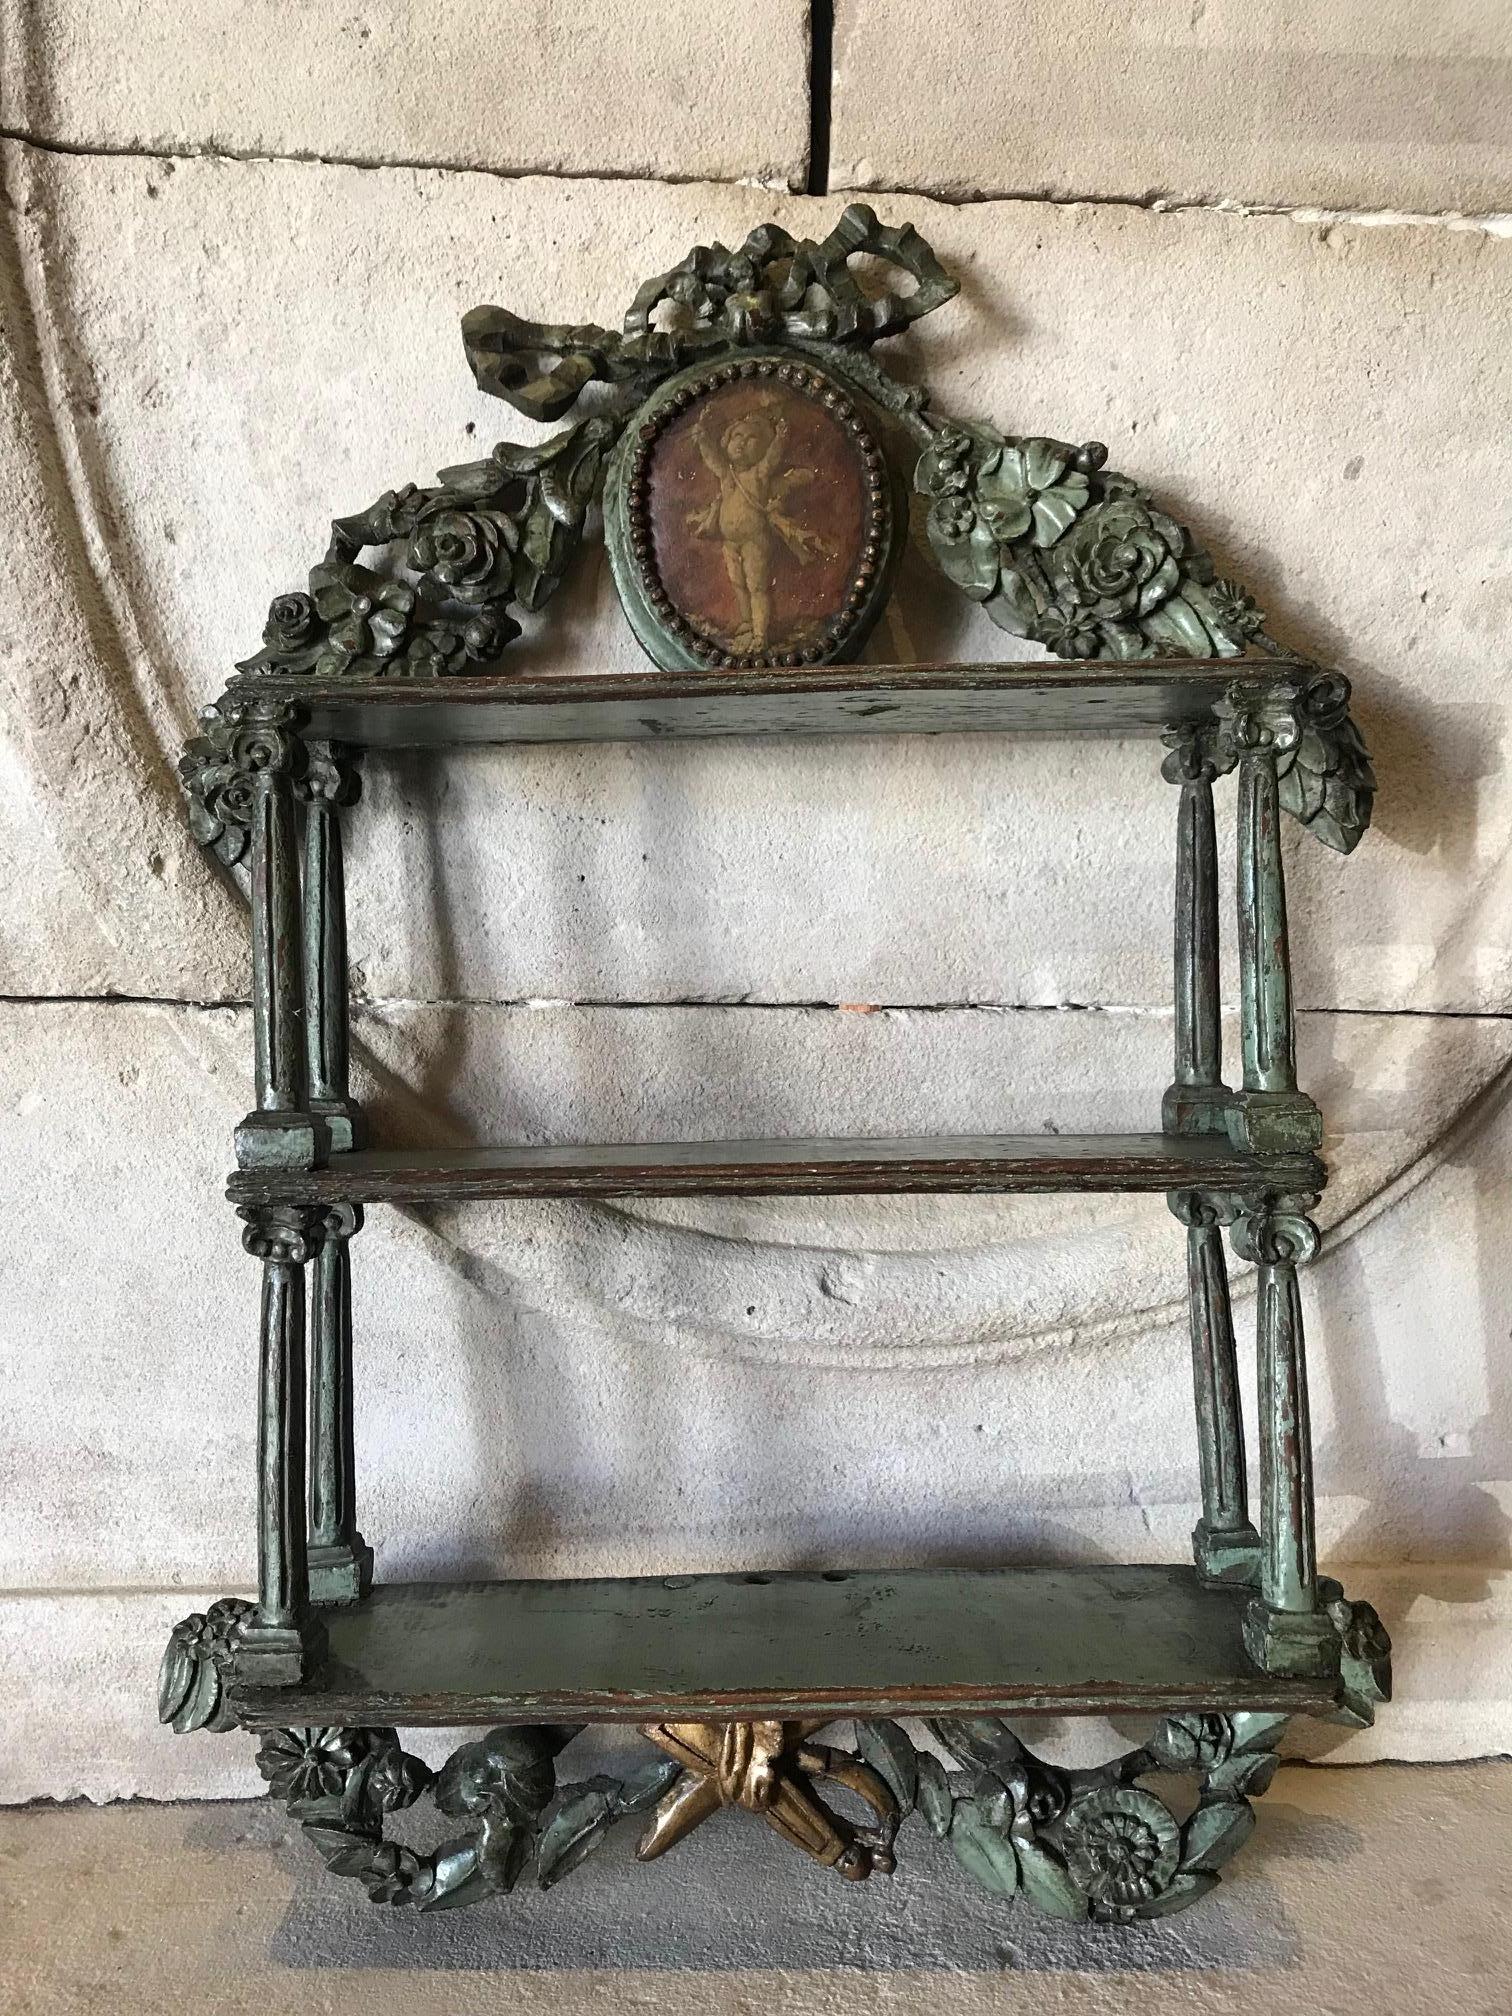 Hand carved and hand painted hanging wall shelf. The beautiful carvings of a dancing Wreath of flowers and acanthus leaves, a Ribbon and bow with a finial at the bottom of flames flambeau. A painted Angelo putti surrounded by delicate carved beads